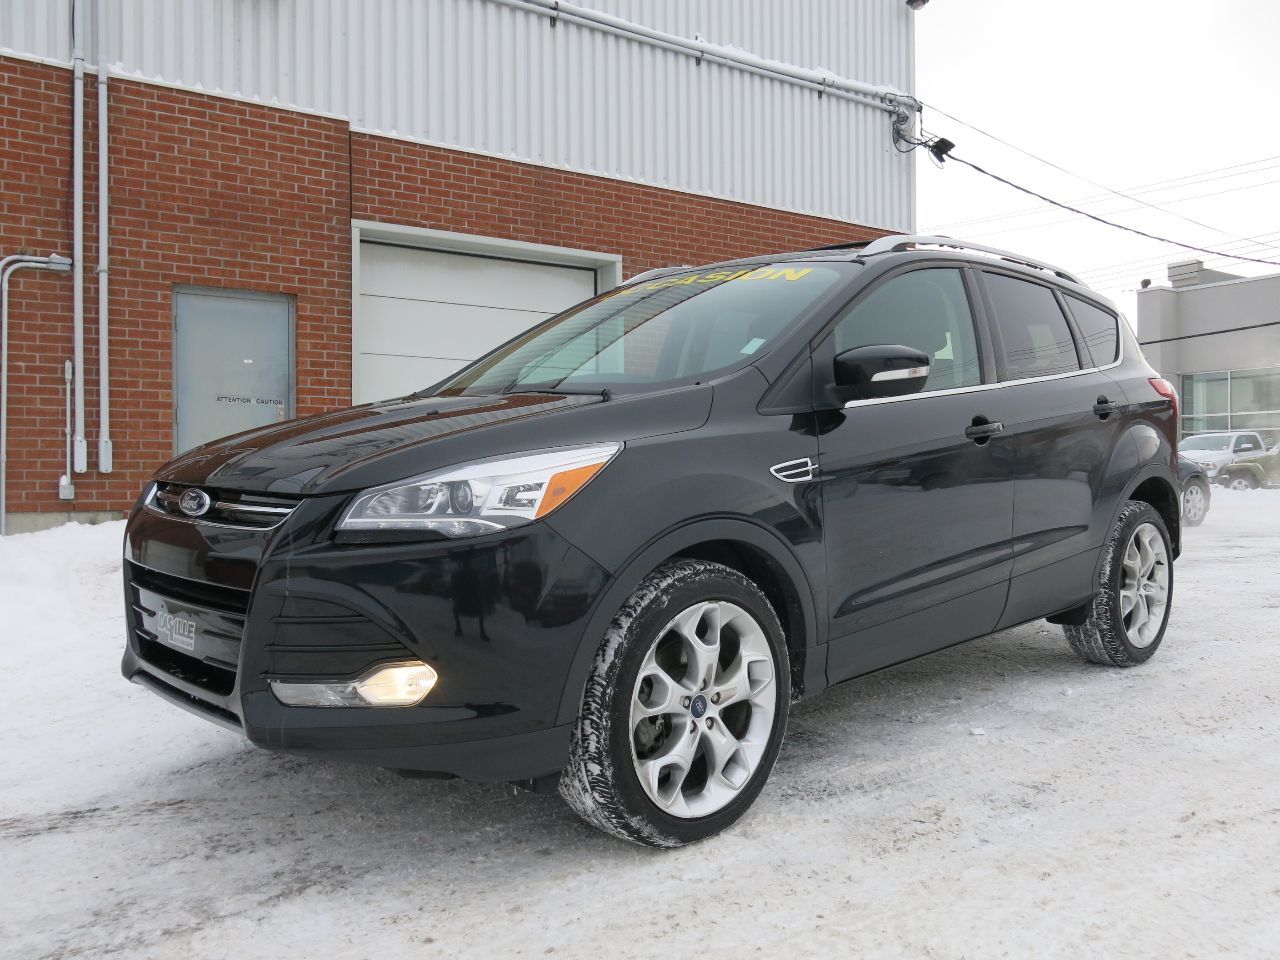 Buy used ford escape montreal #10